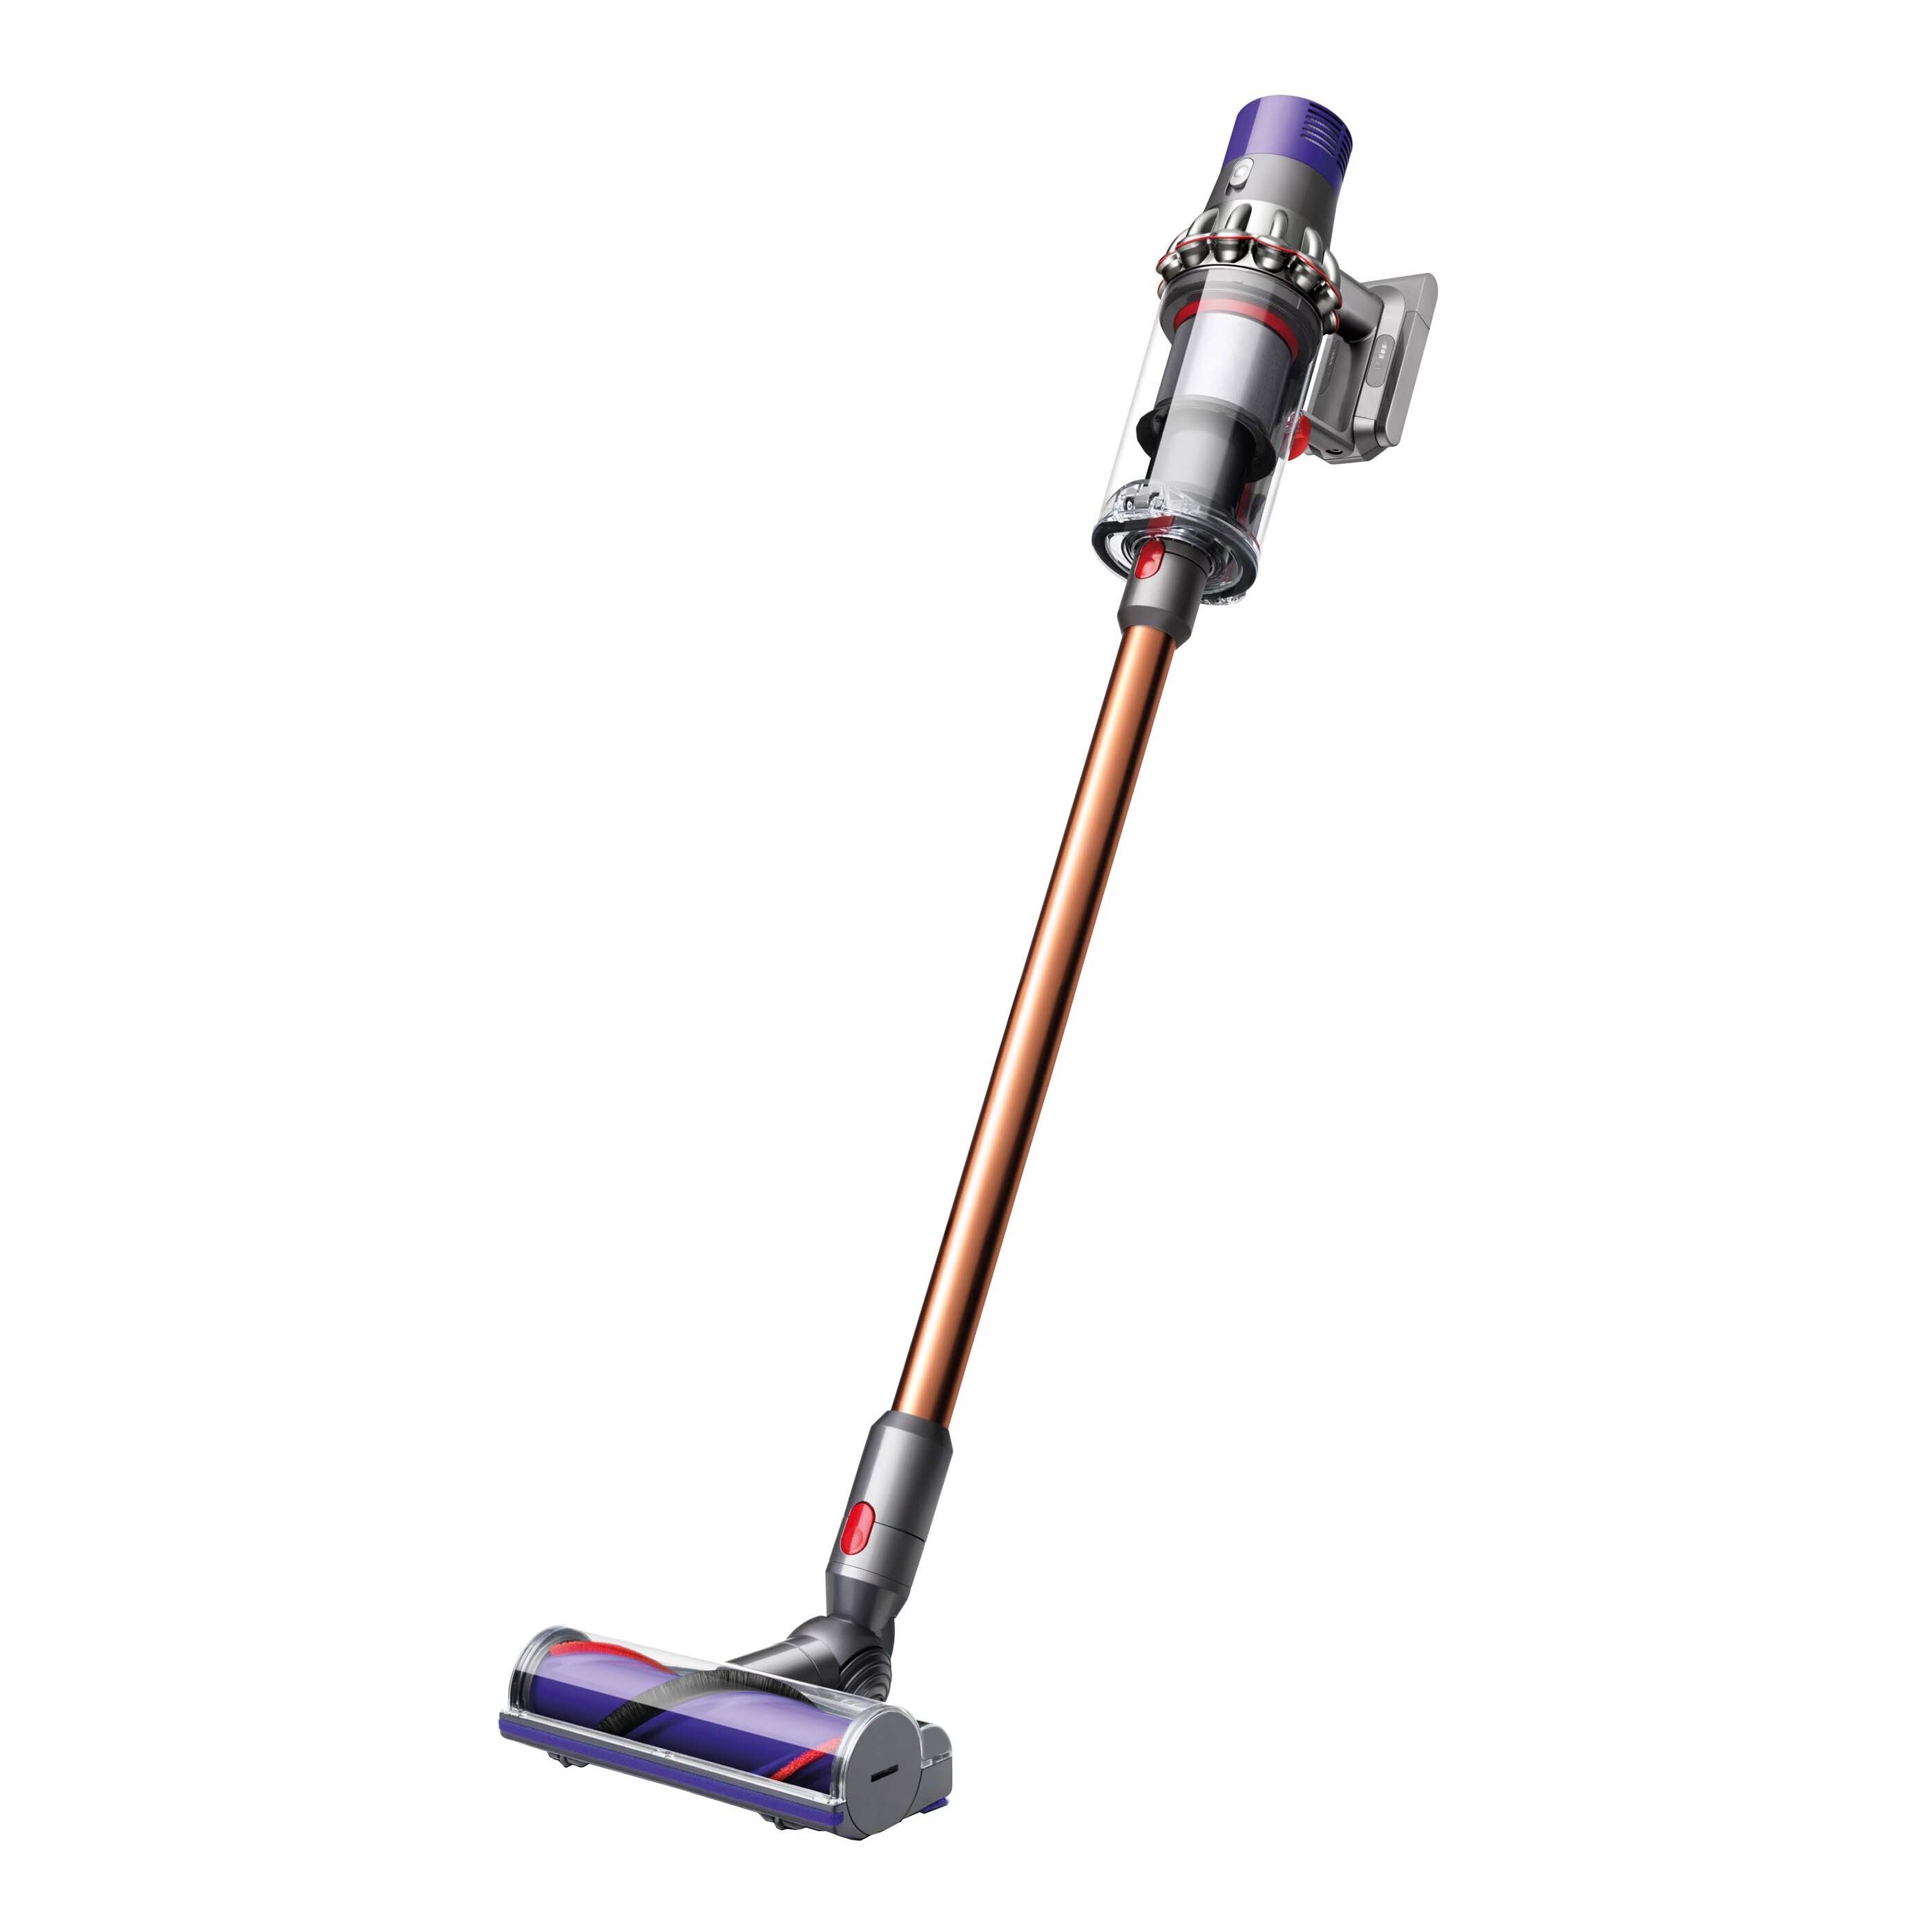 Пылесос Dyson Cyclone V10 Absolute, серый/желтый пылесос dyson cyclone v10 absolute extra